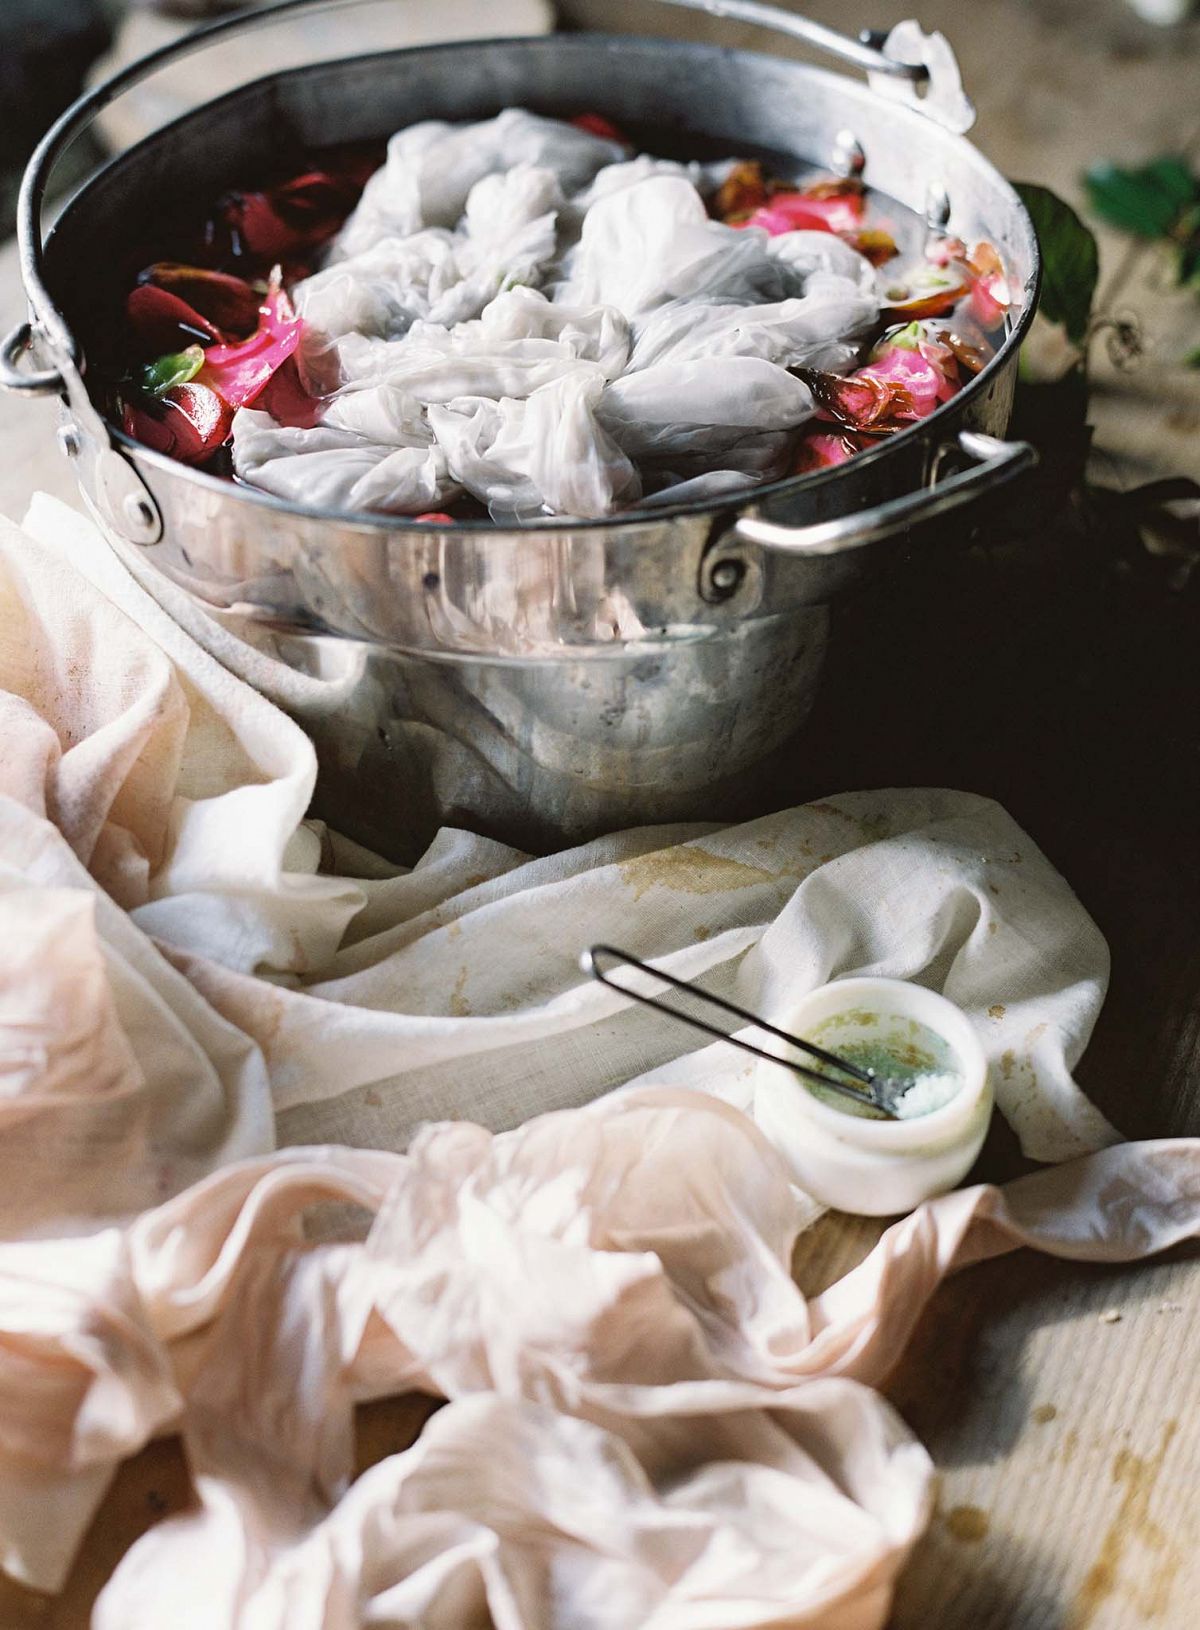 Artisan Profile: The Making of the Wedding Dress, Ribbons, and Stationery